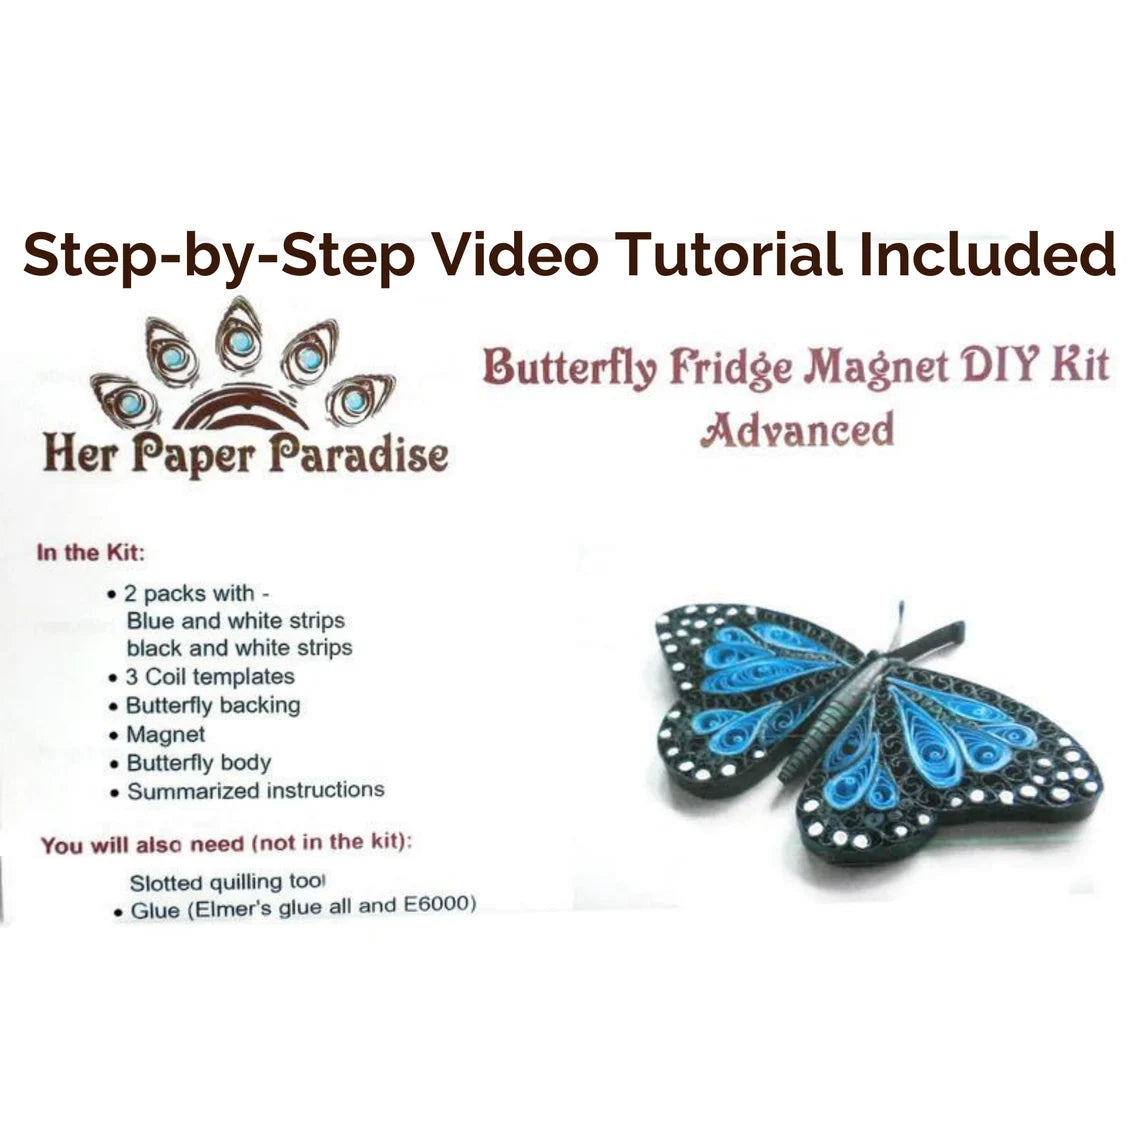 Quilling Butterfly DIY fridge magnet kit with step-by-step tutorial by Her Paper Paradise